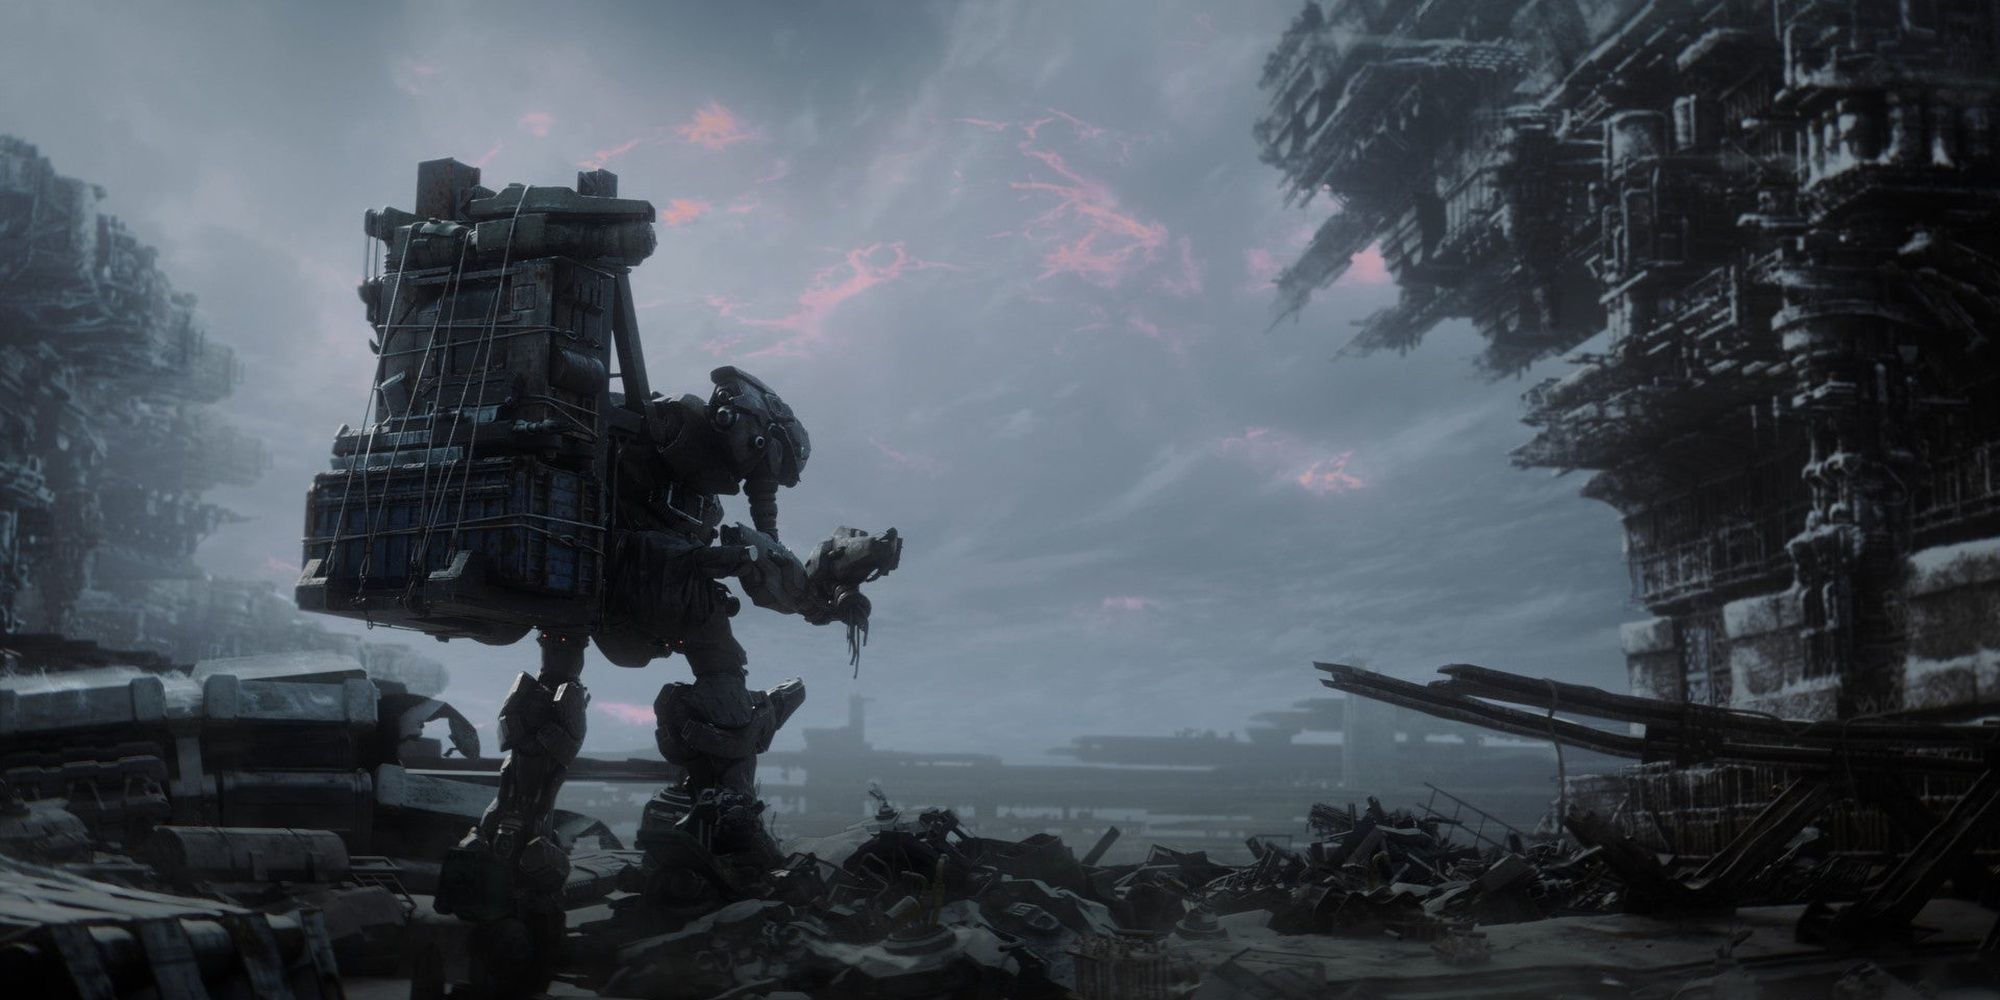 armored core 6 mecha rises from the ice